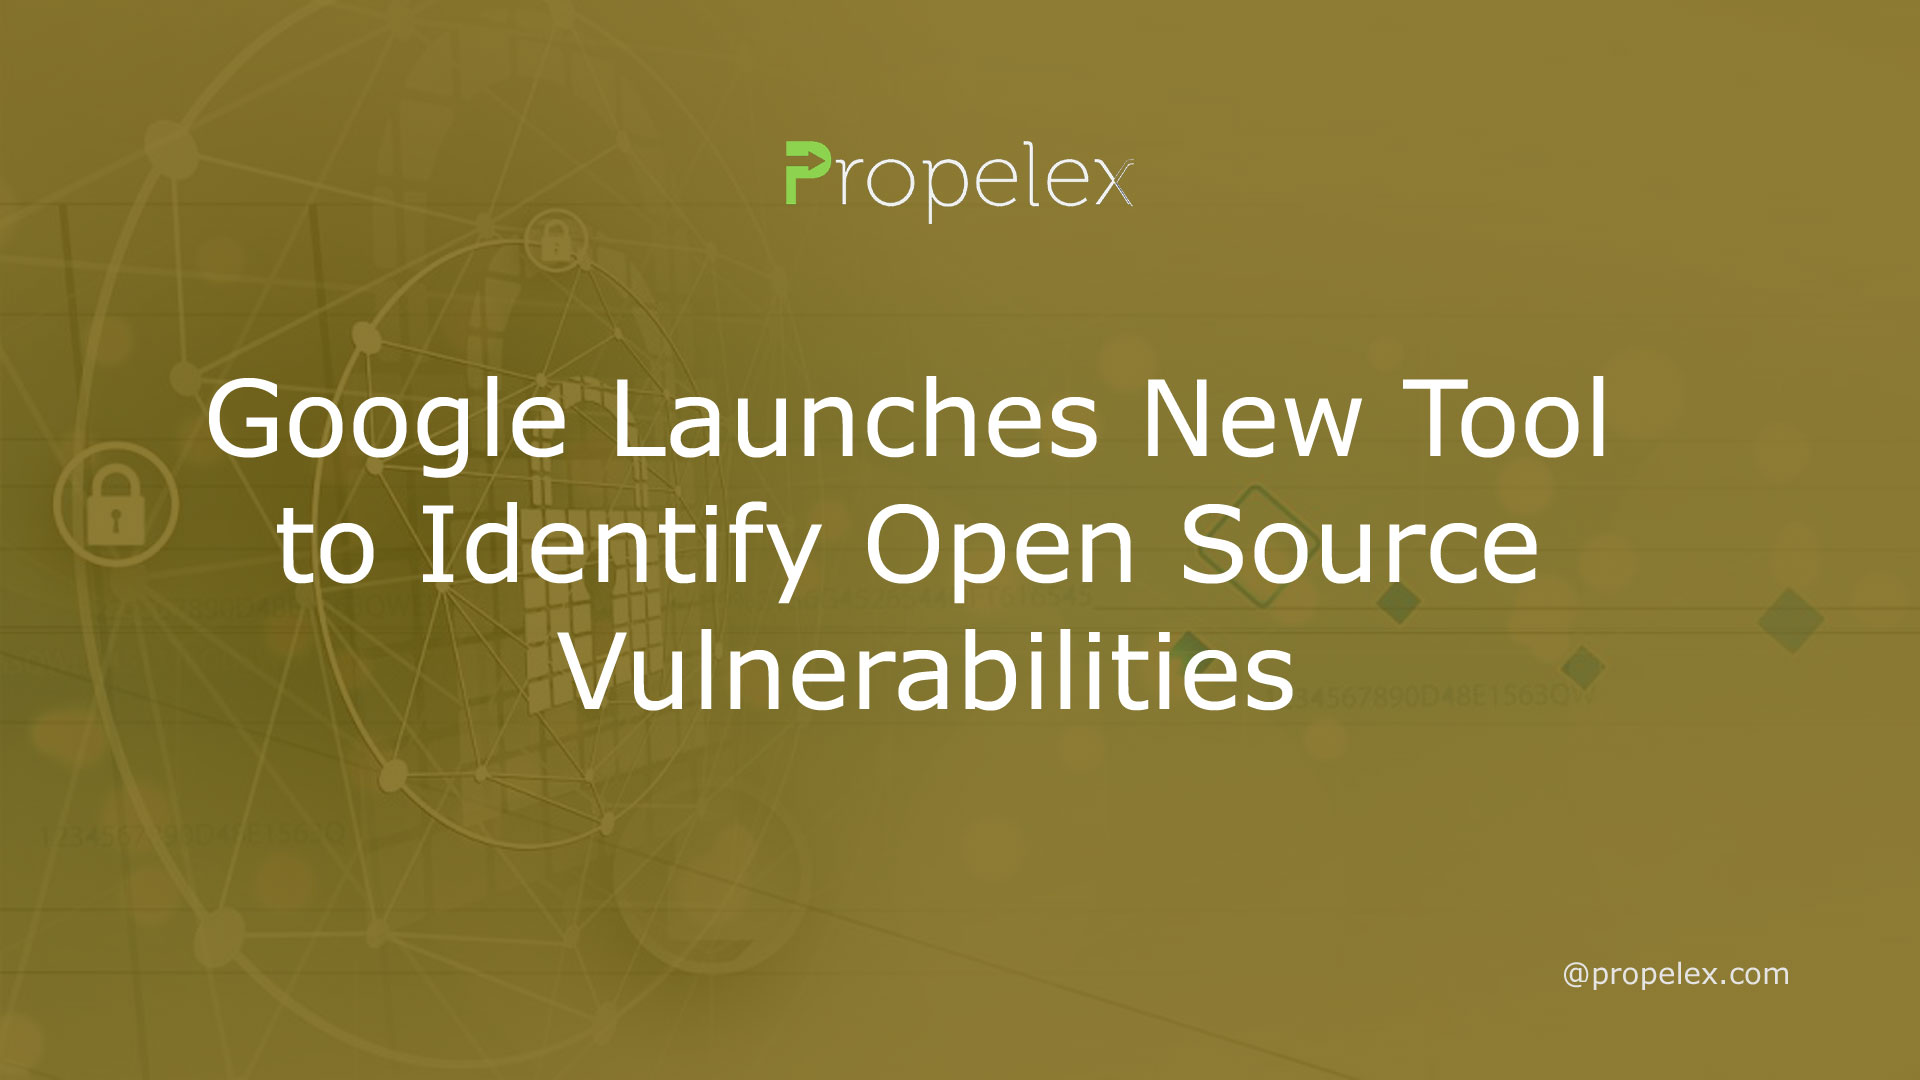 Google Launches New Tool to Identify Open Source Vulnerabilities